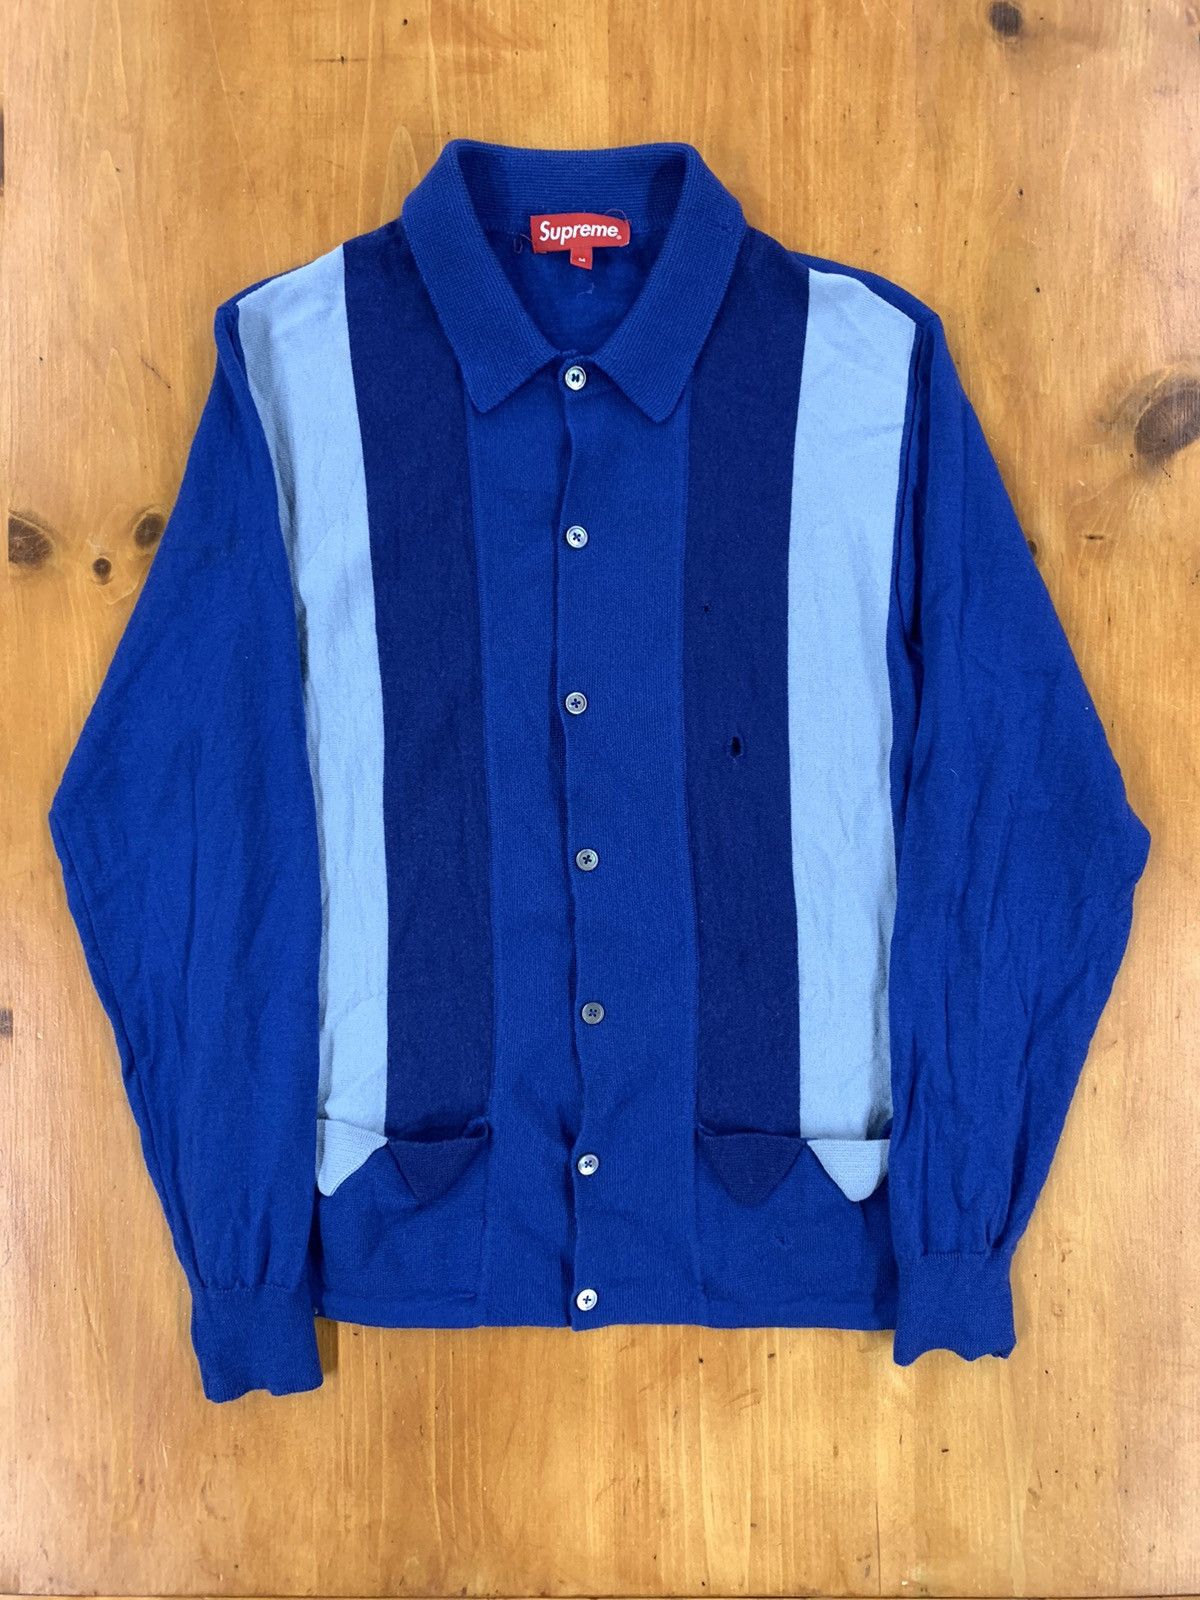 Pre-owned Coloured Cable Knit Sweater X Supreme Blue Stripe Knit Cardigan